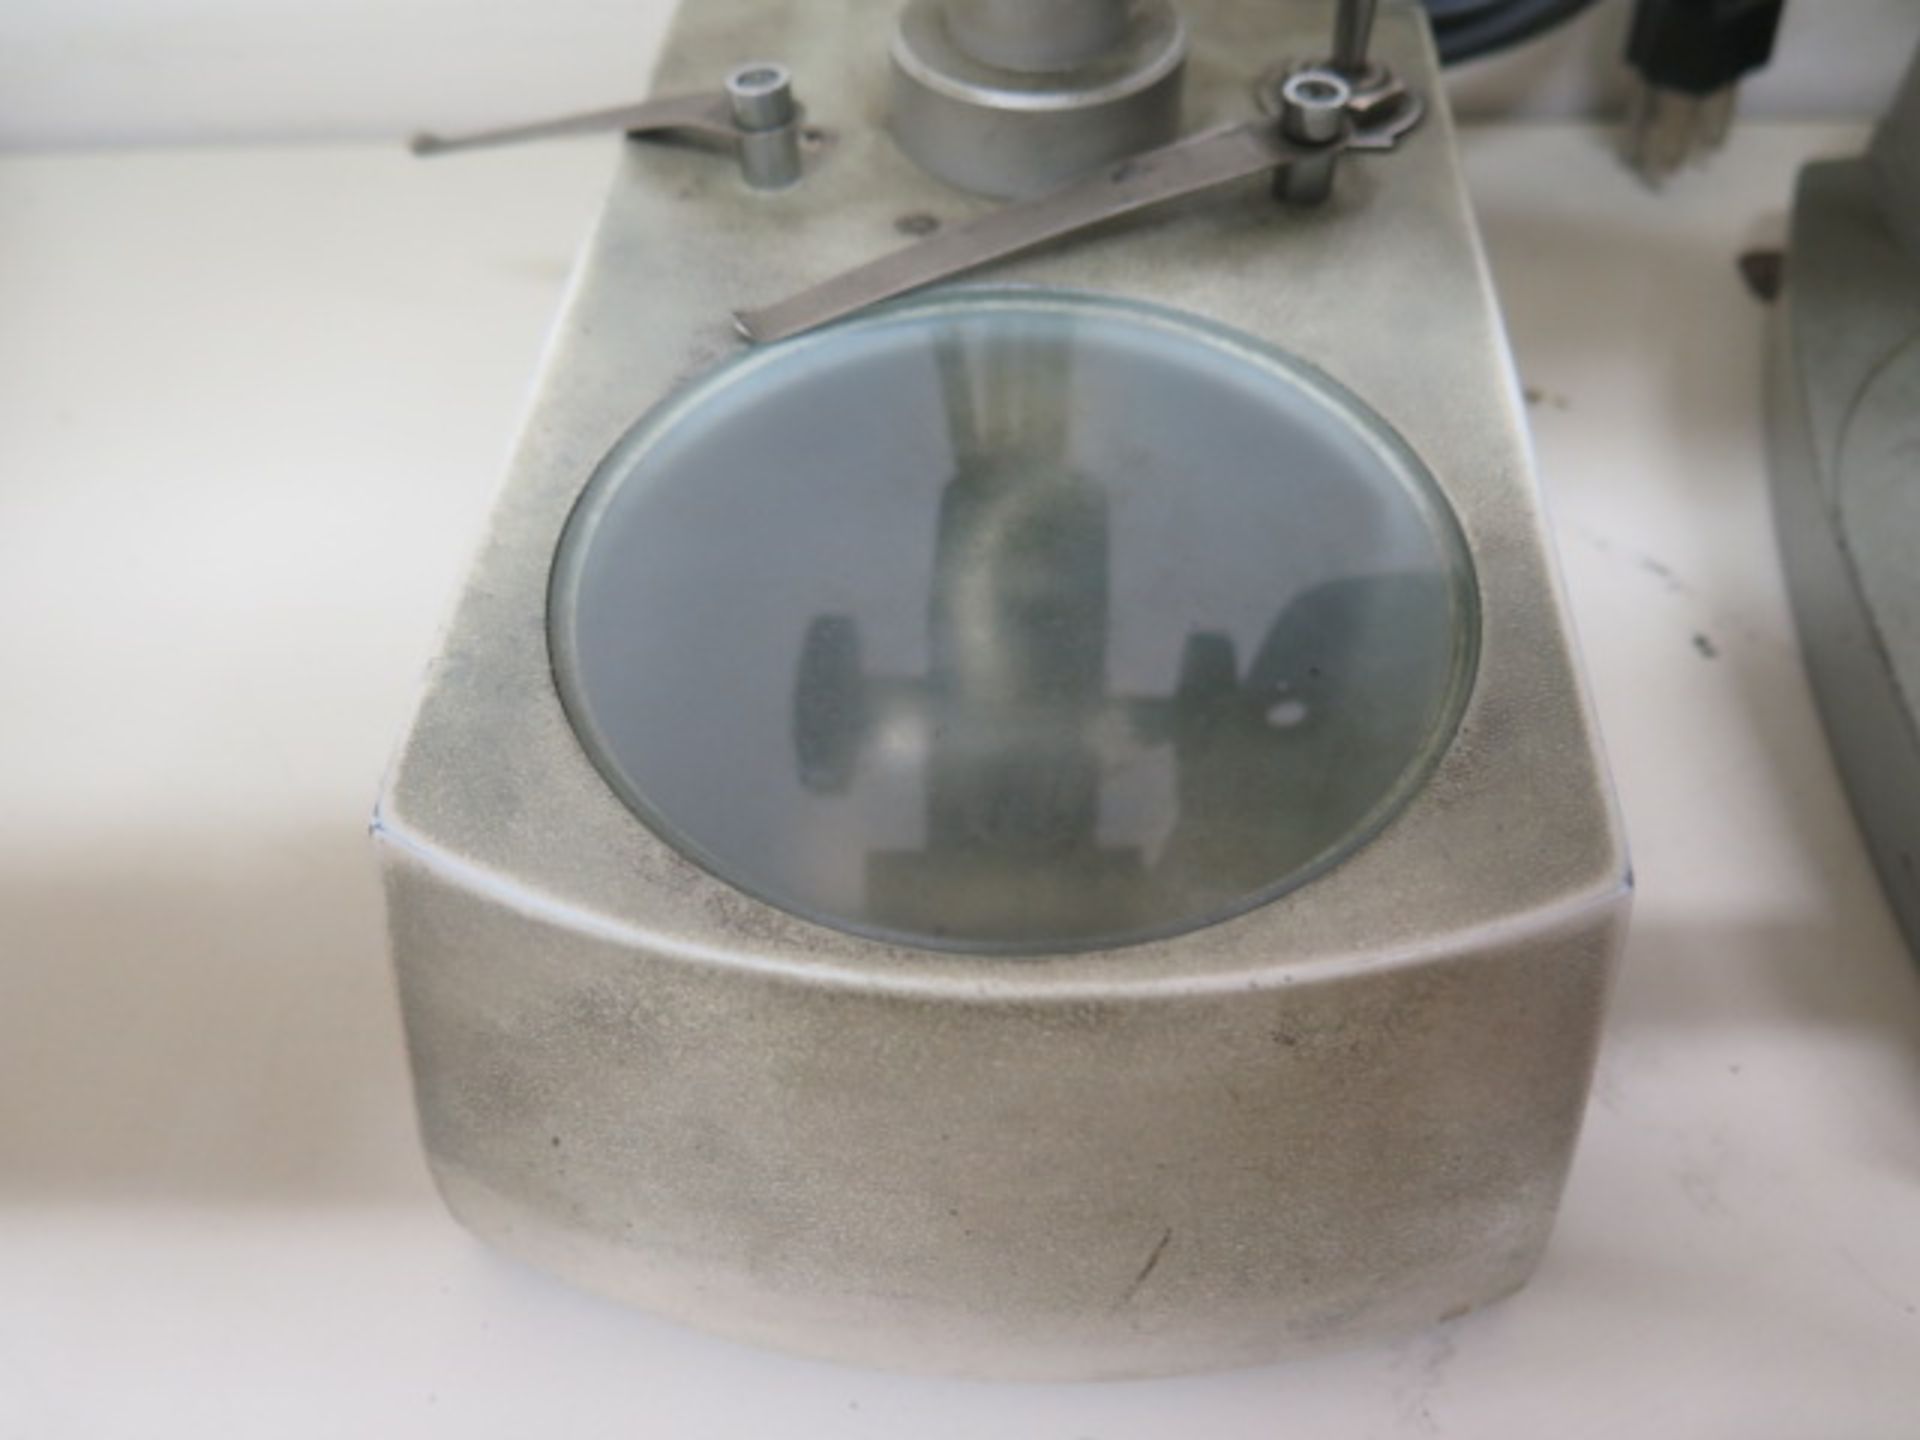 H&H iP Stereo Microscope w/ Light Source (SOLD AS-IS - NO WARRANTY) - Image 4 of 6